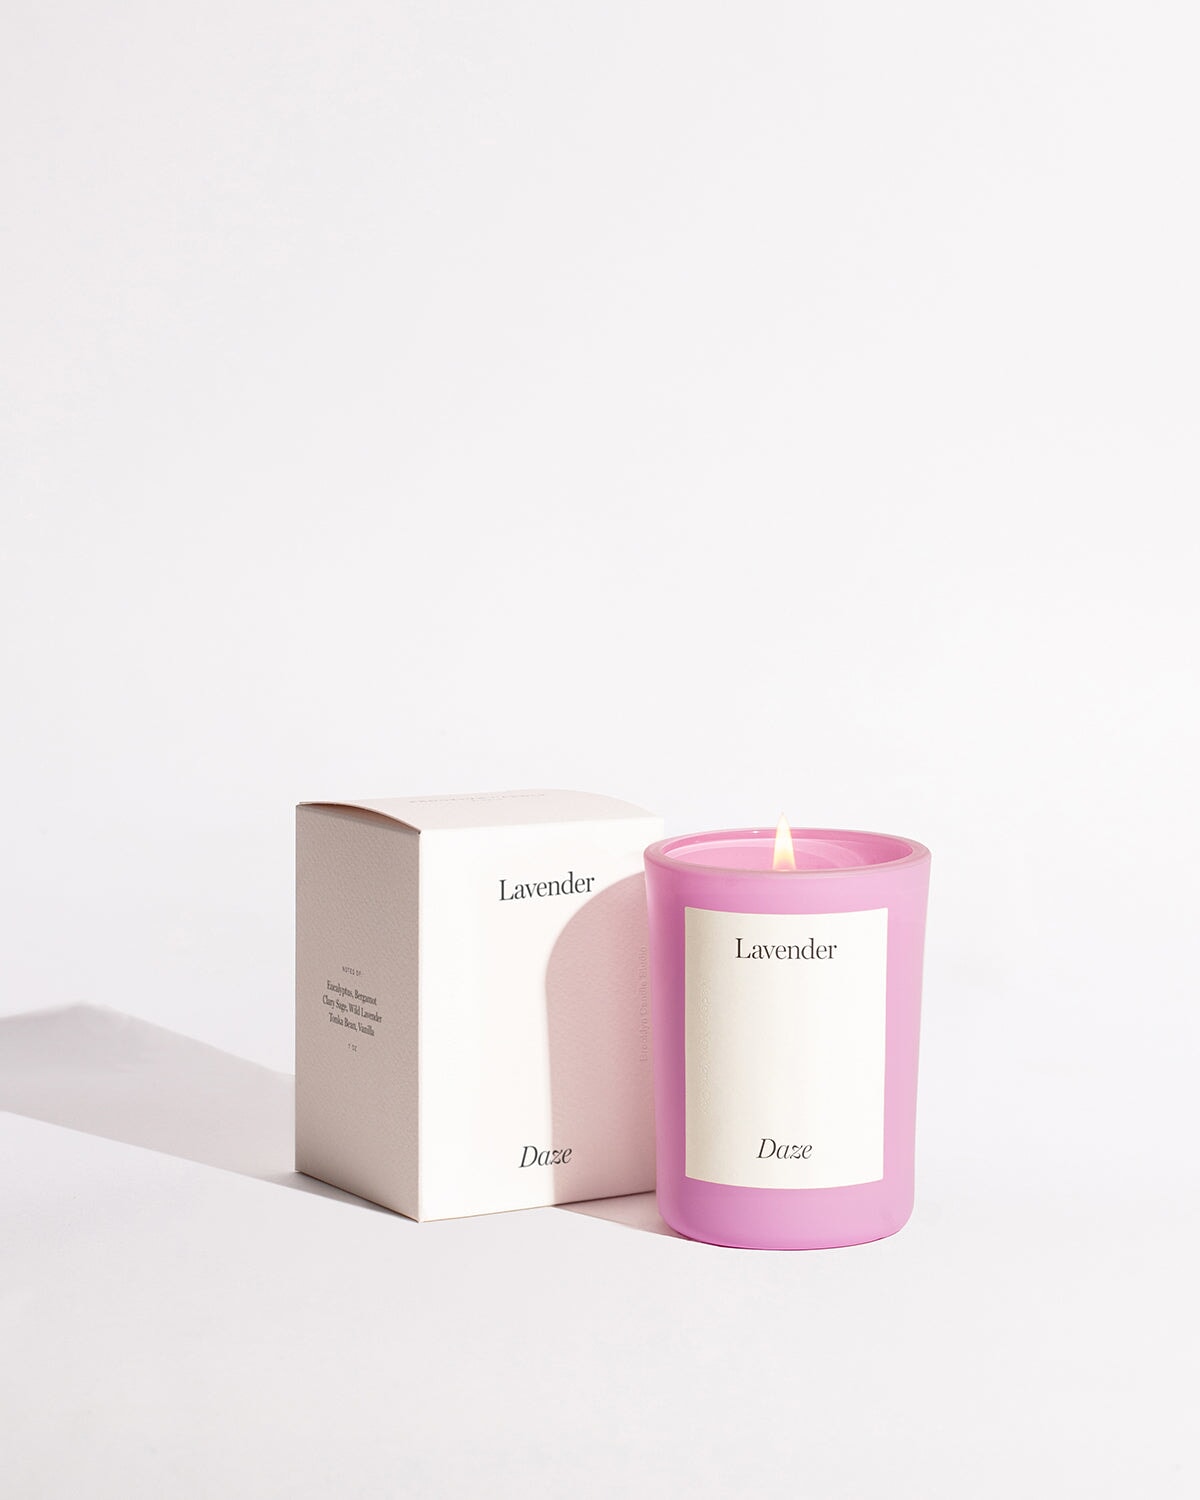 Limited Edition Lavender Daze Candle Limited Edition Brooklyn Candle Studio 